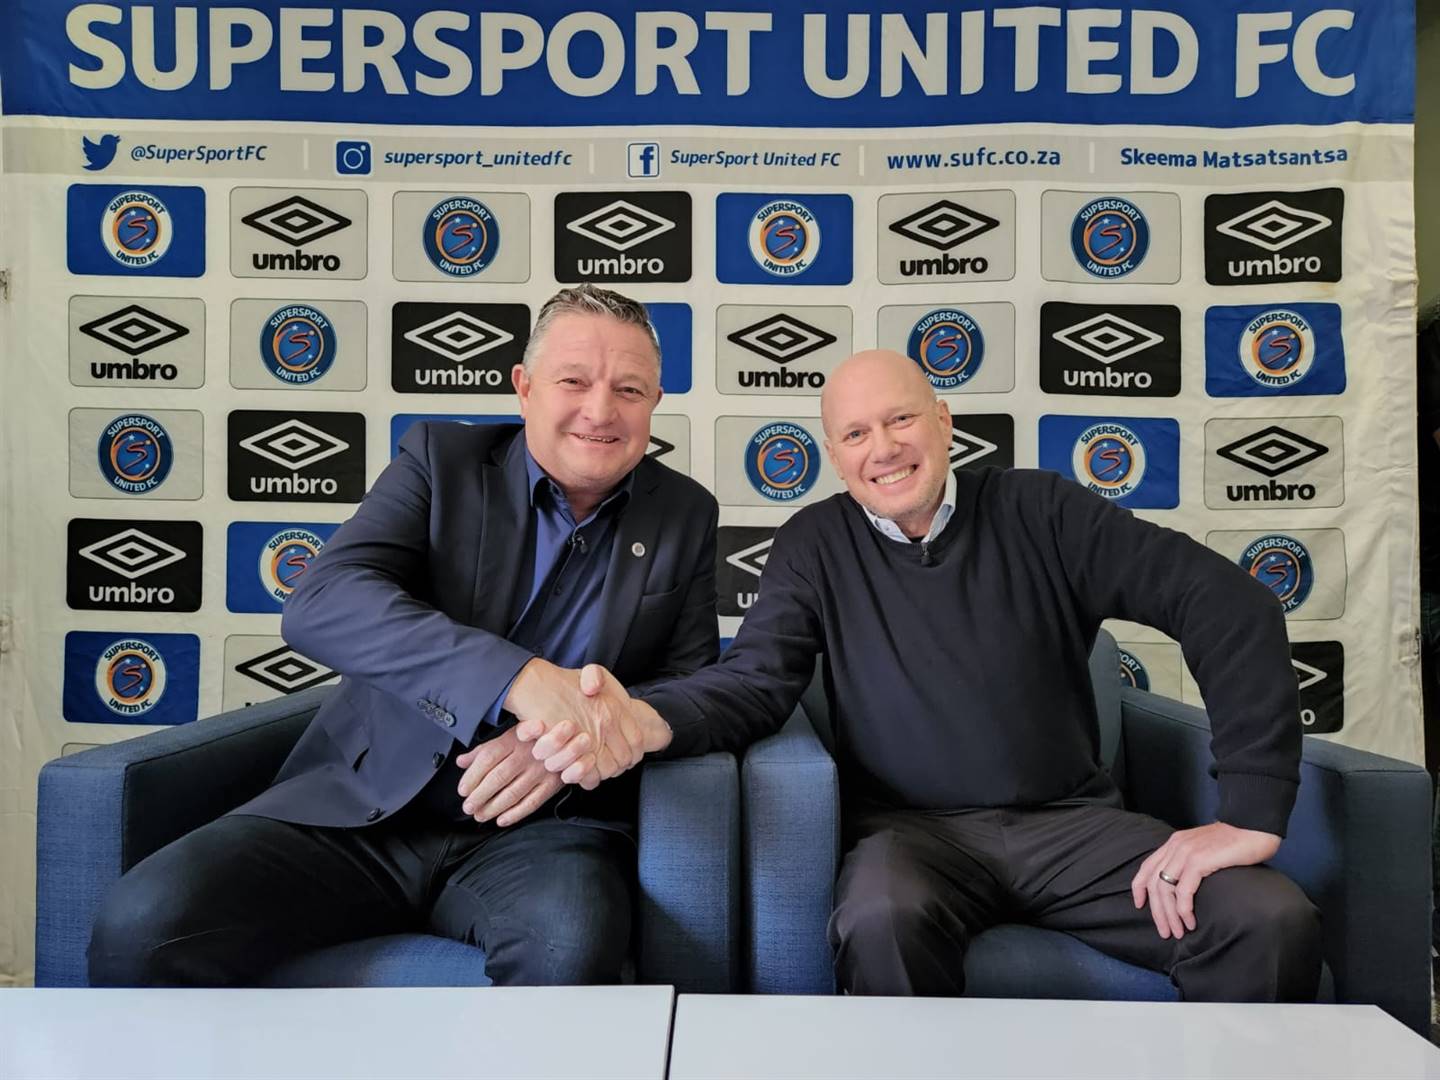 Gavin Hunt was announced as the new head coach of SuperSport United after a successful stint at the club between 2007 and 2010. Photo: SuperSport United/Twitter